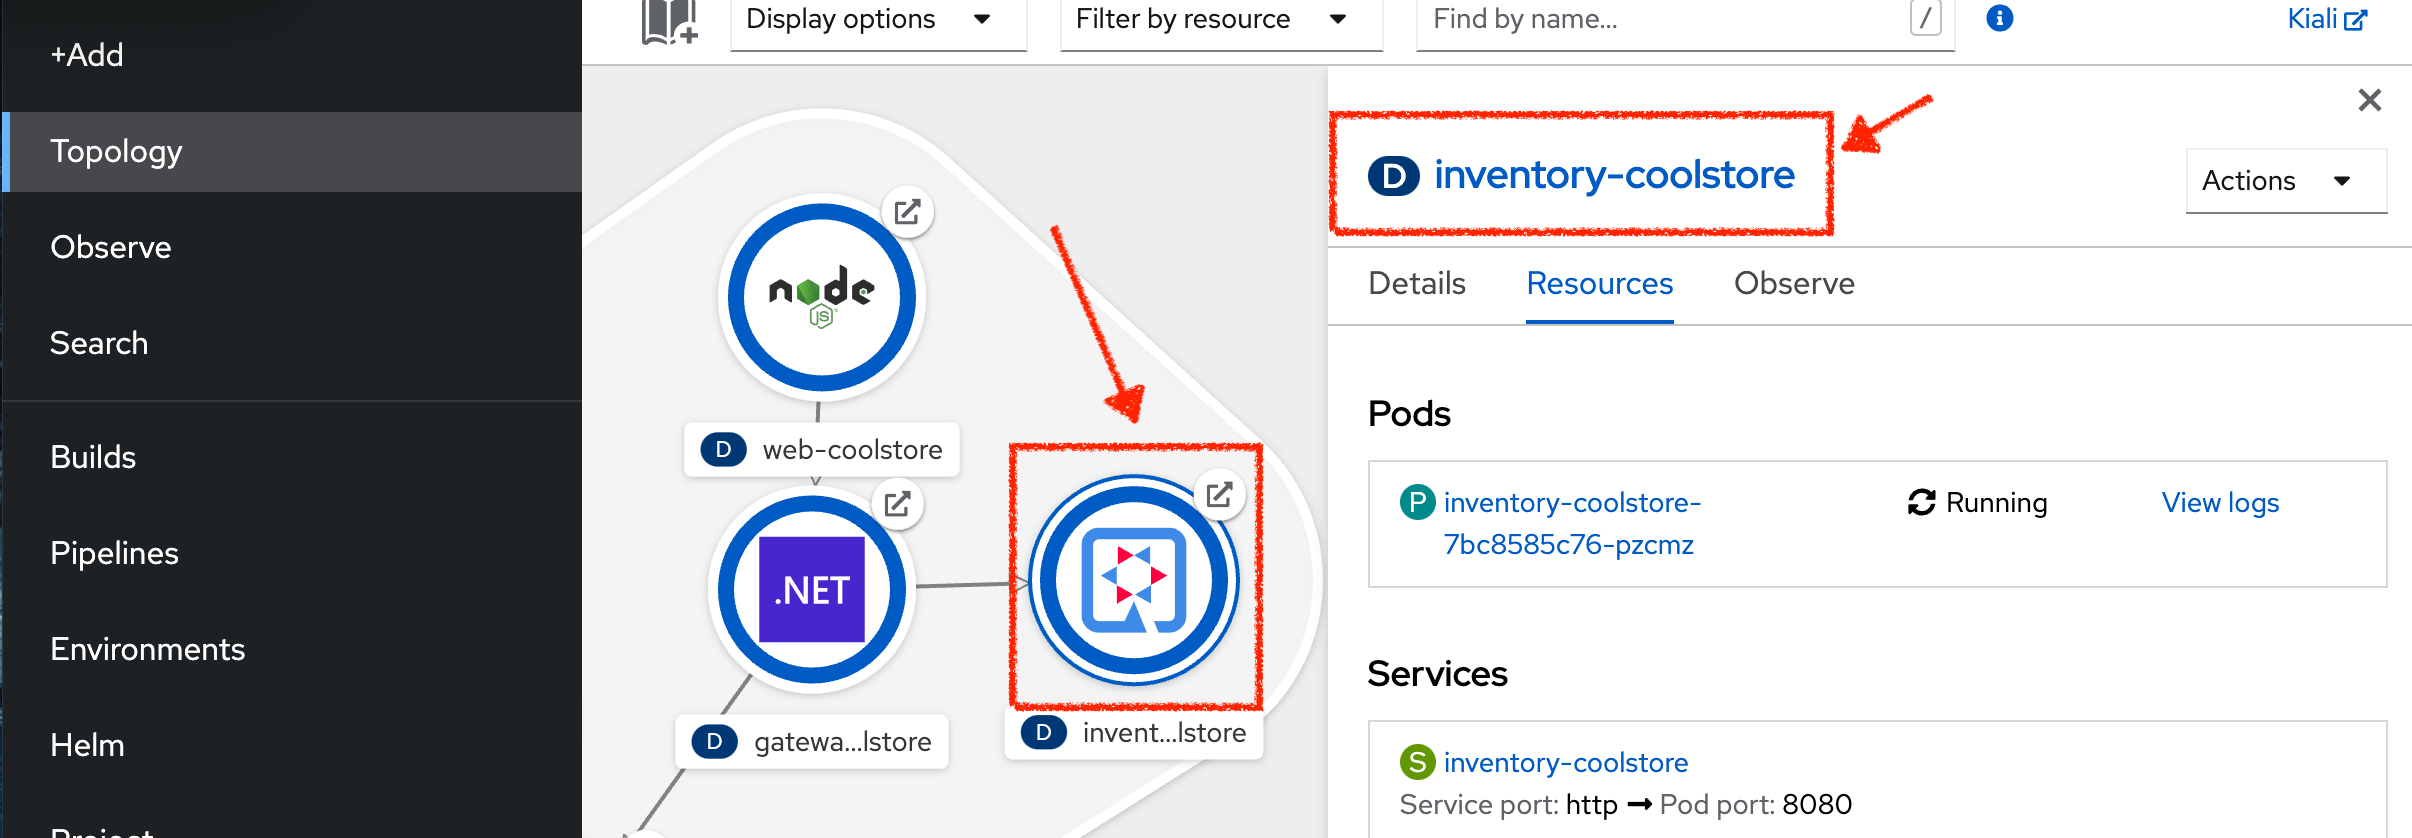 OpenShift - Inventory Topology